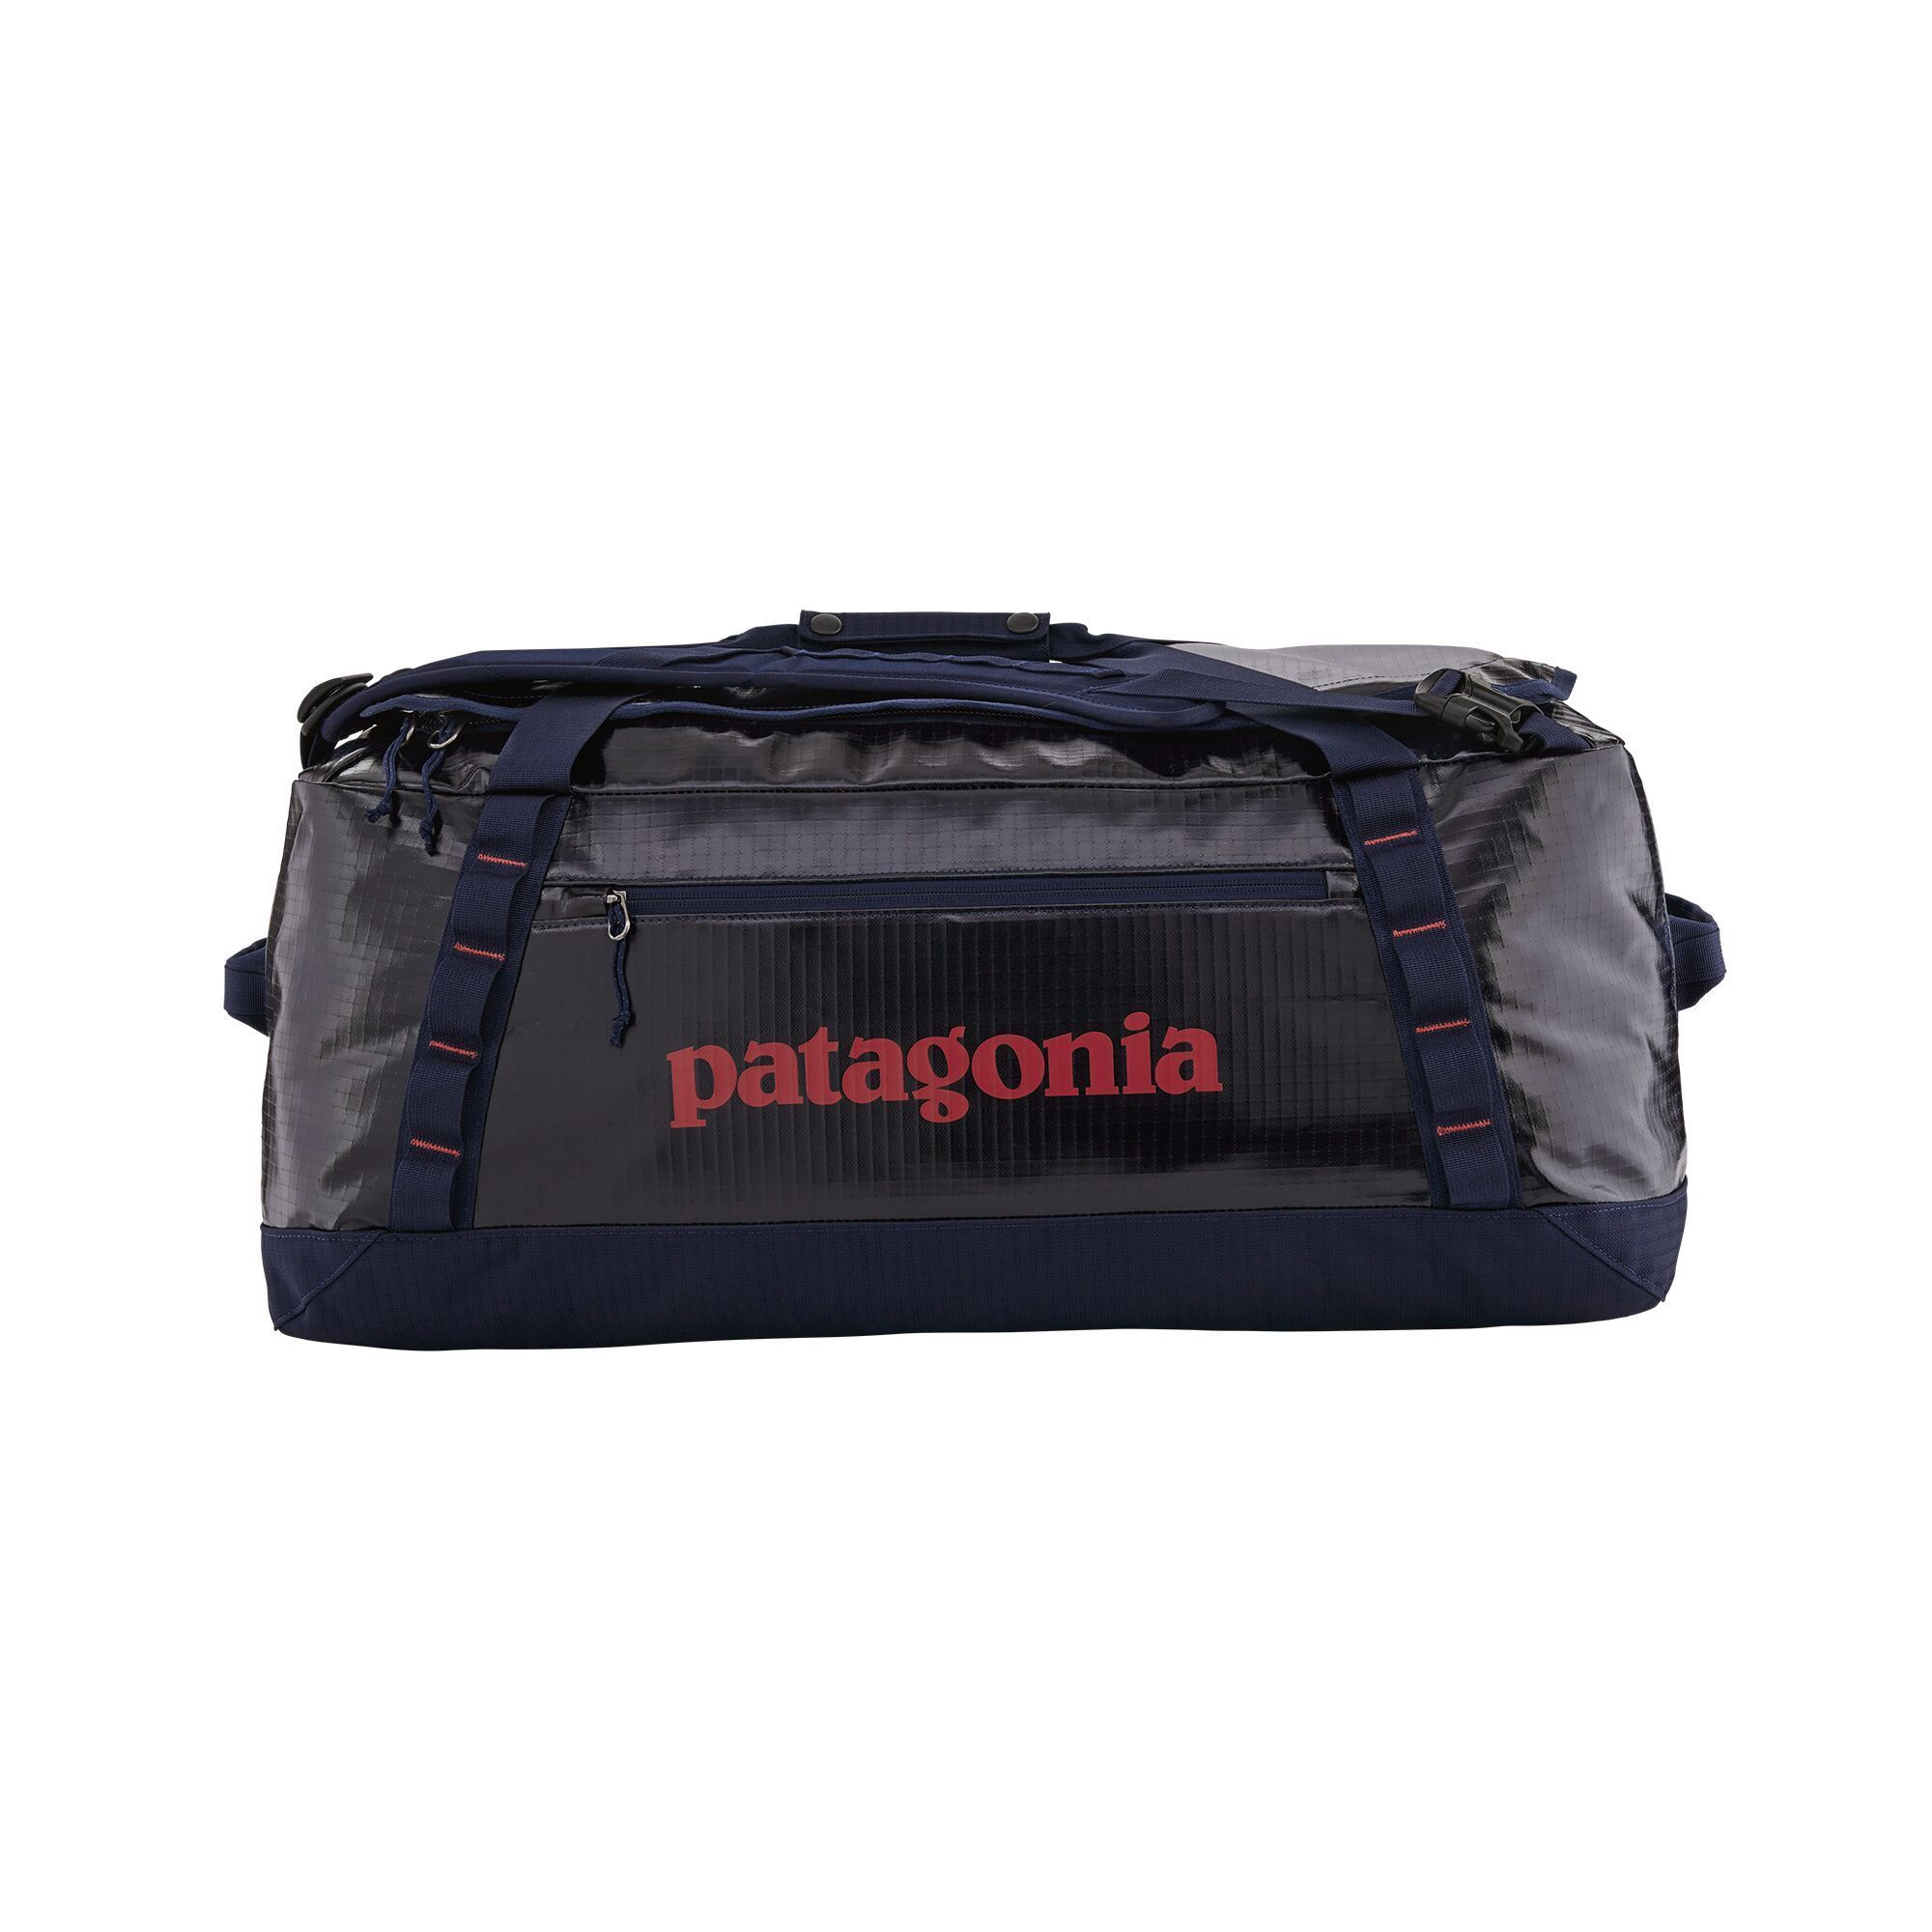 Patagonia Black Hole Duffel Bag 55L - 100 % Recycled Polyester, Classic Navy